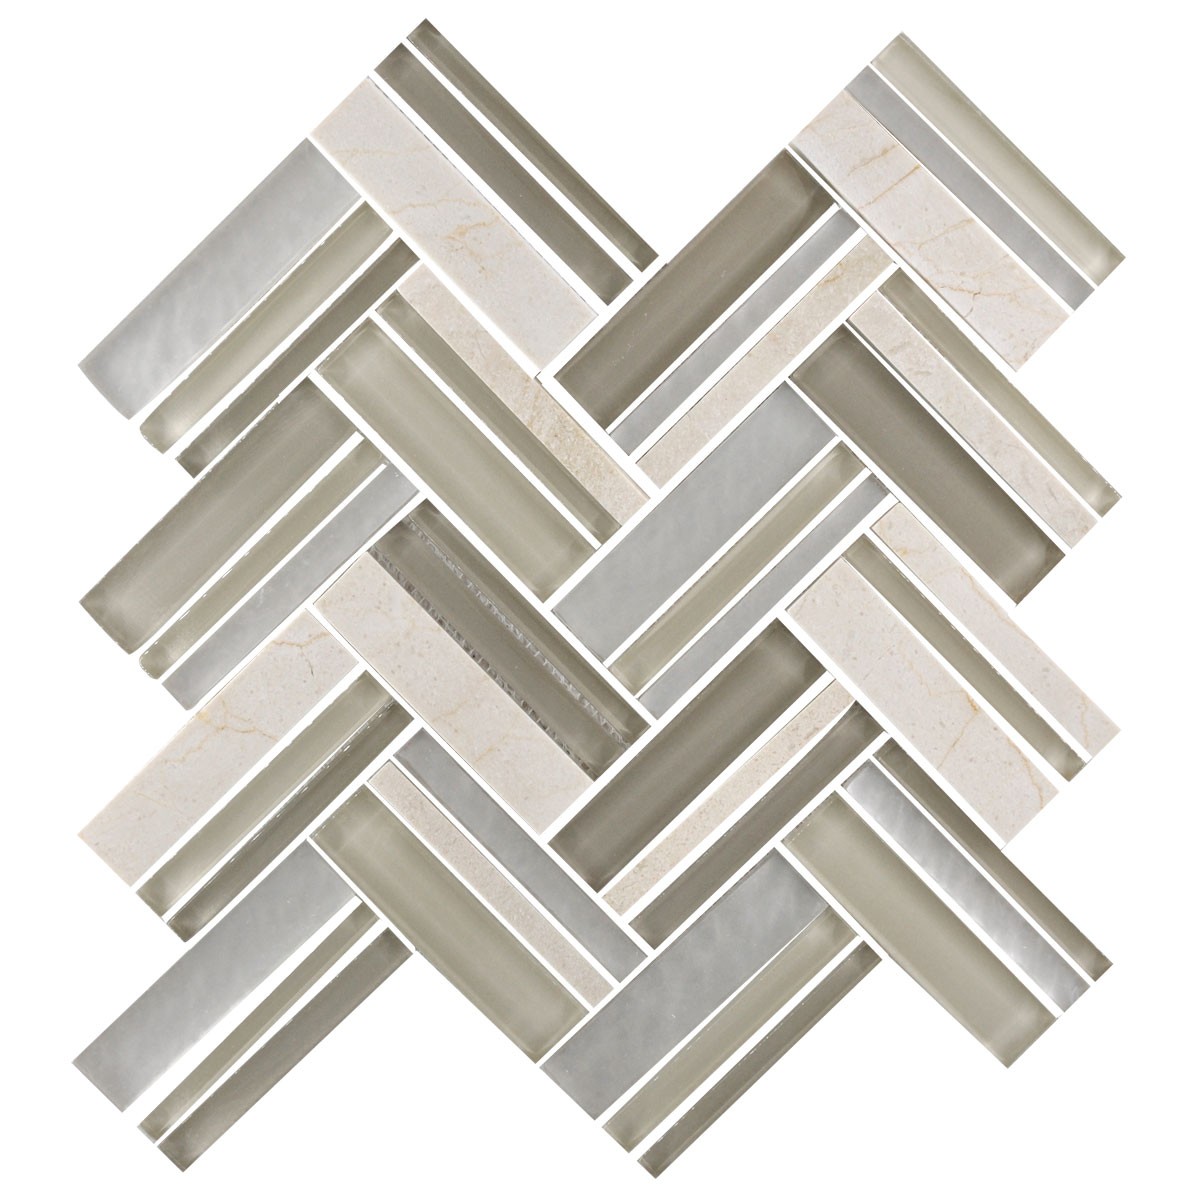 12.4 in. x 13.8 in. Glass Stone Blend Strip Mosaic Tile in Multi - 8mm Thickness (DK-8NF0606-002)